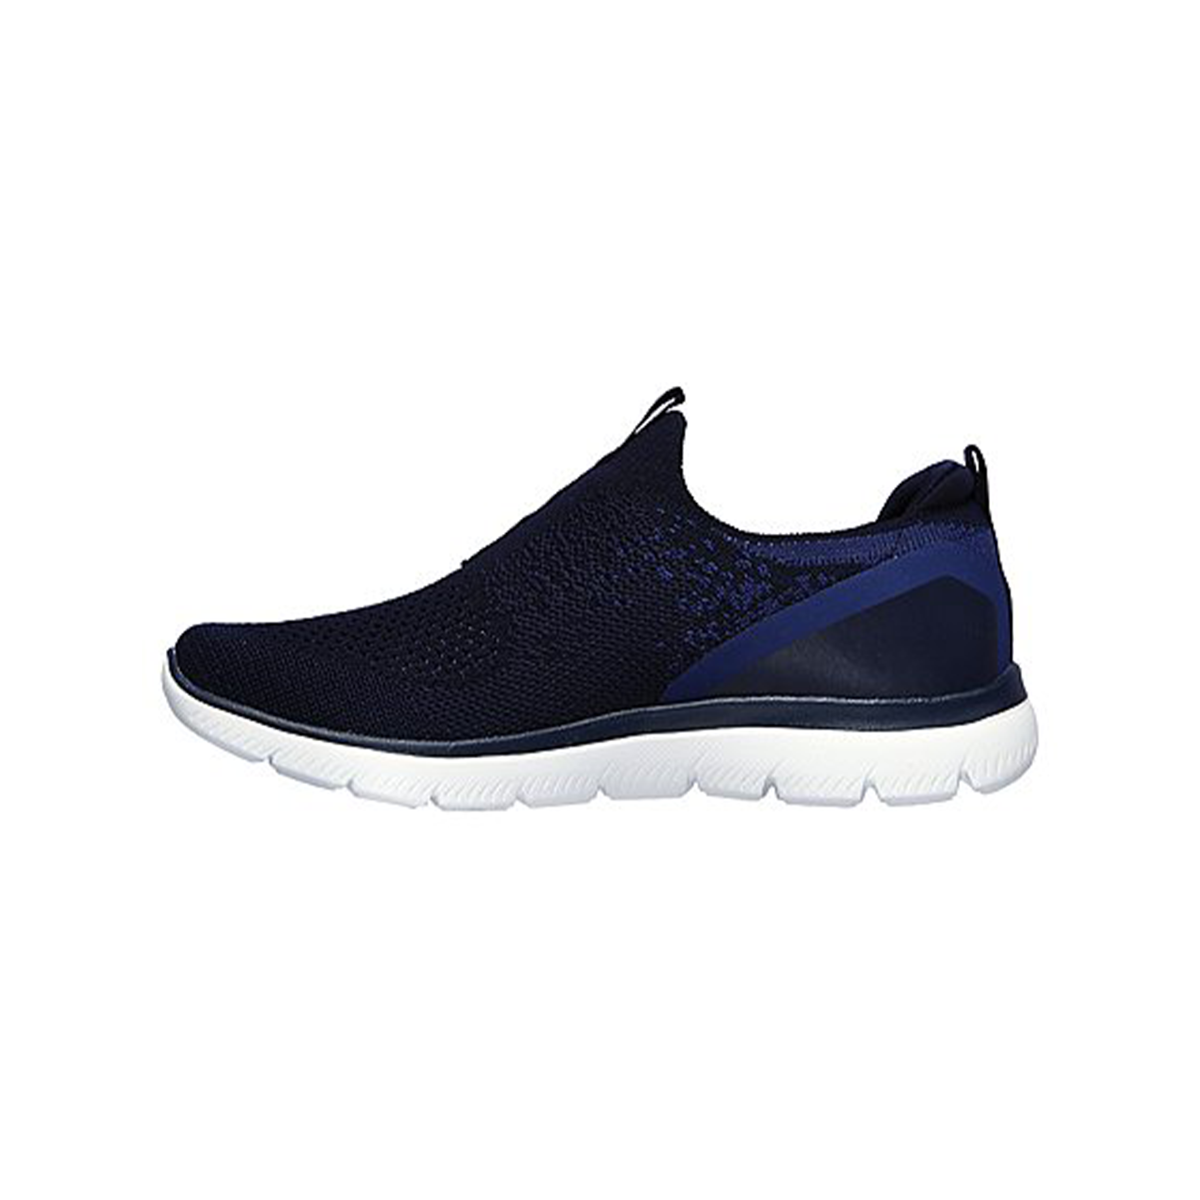 Skechers Summits Daily Flourish Shoes For Women, Navy